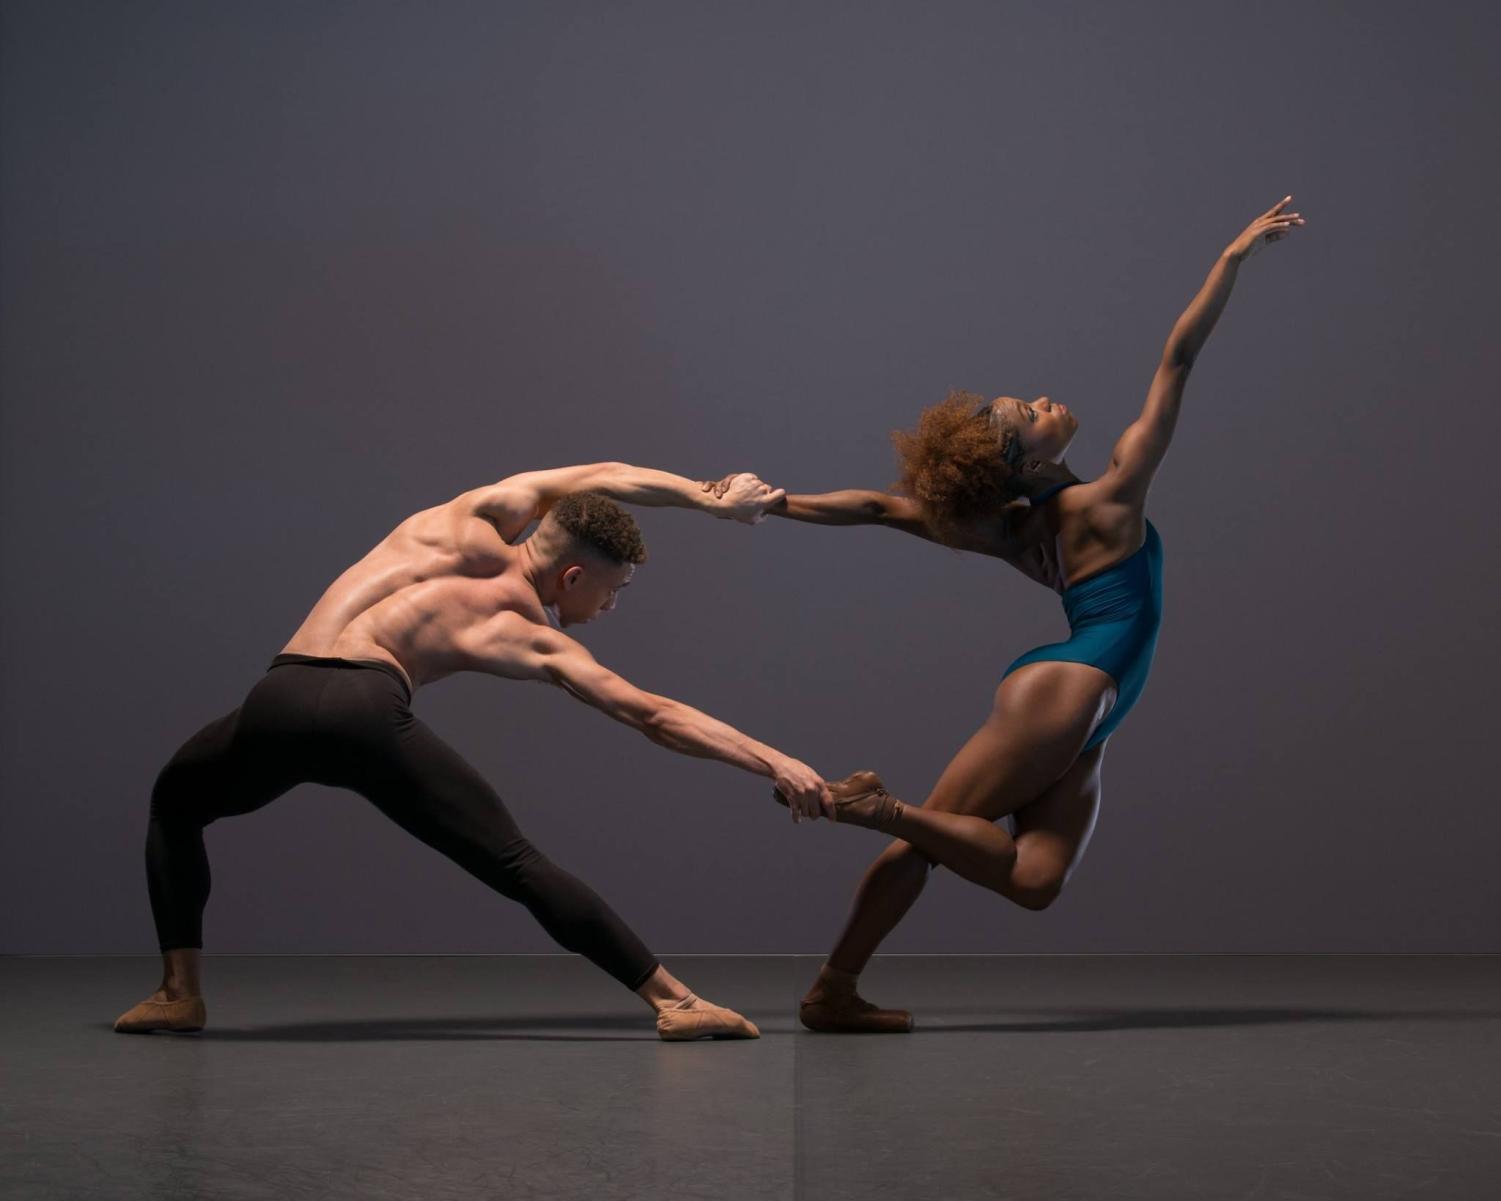 Female duet | Dance photography poses, Contemporary dance poses, Modern  dance photography